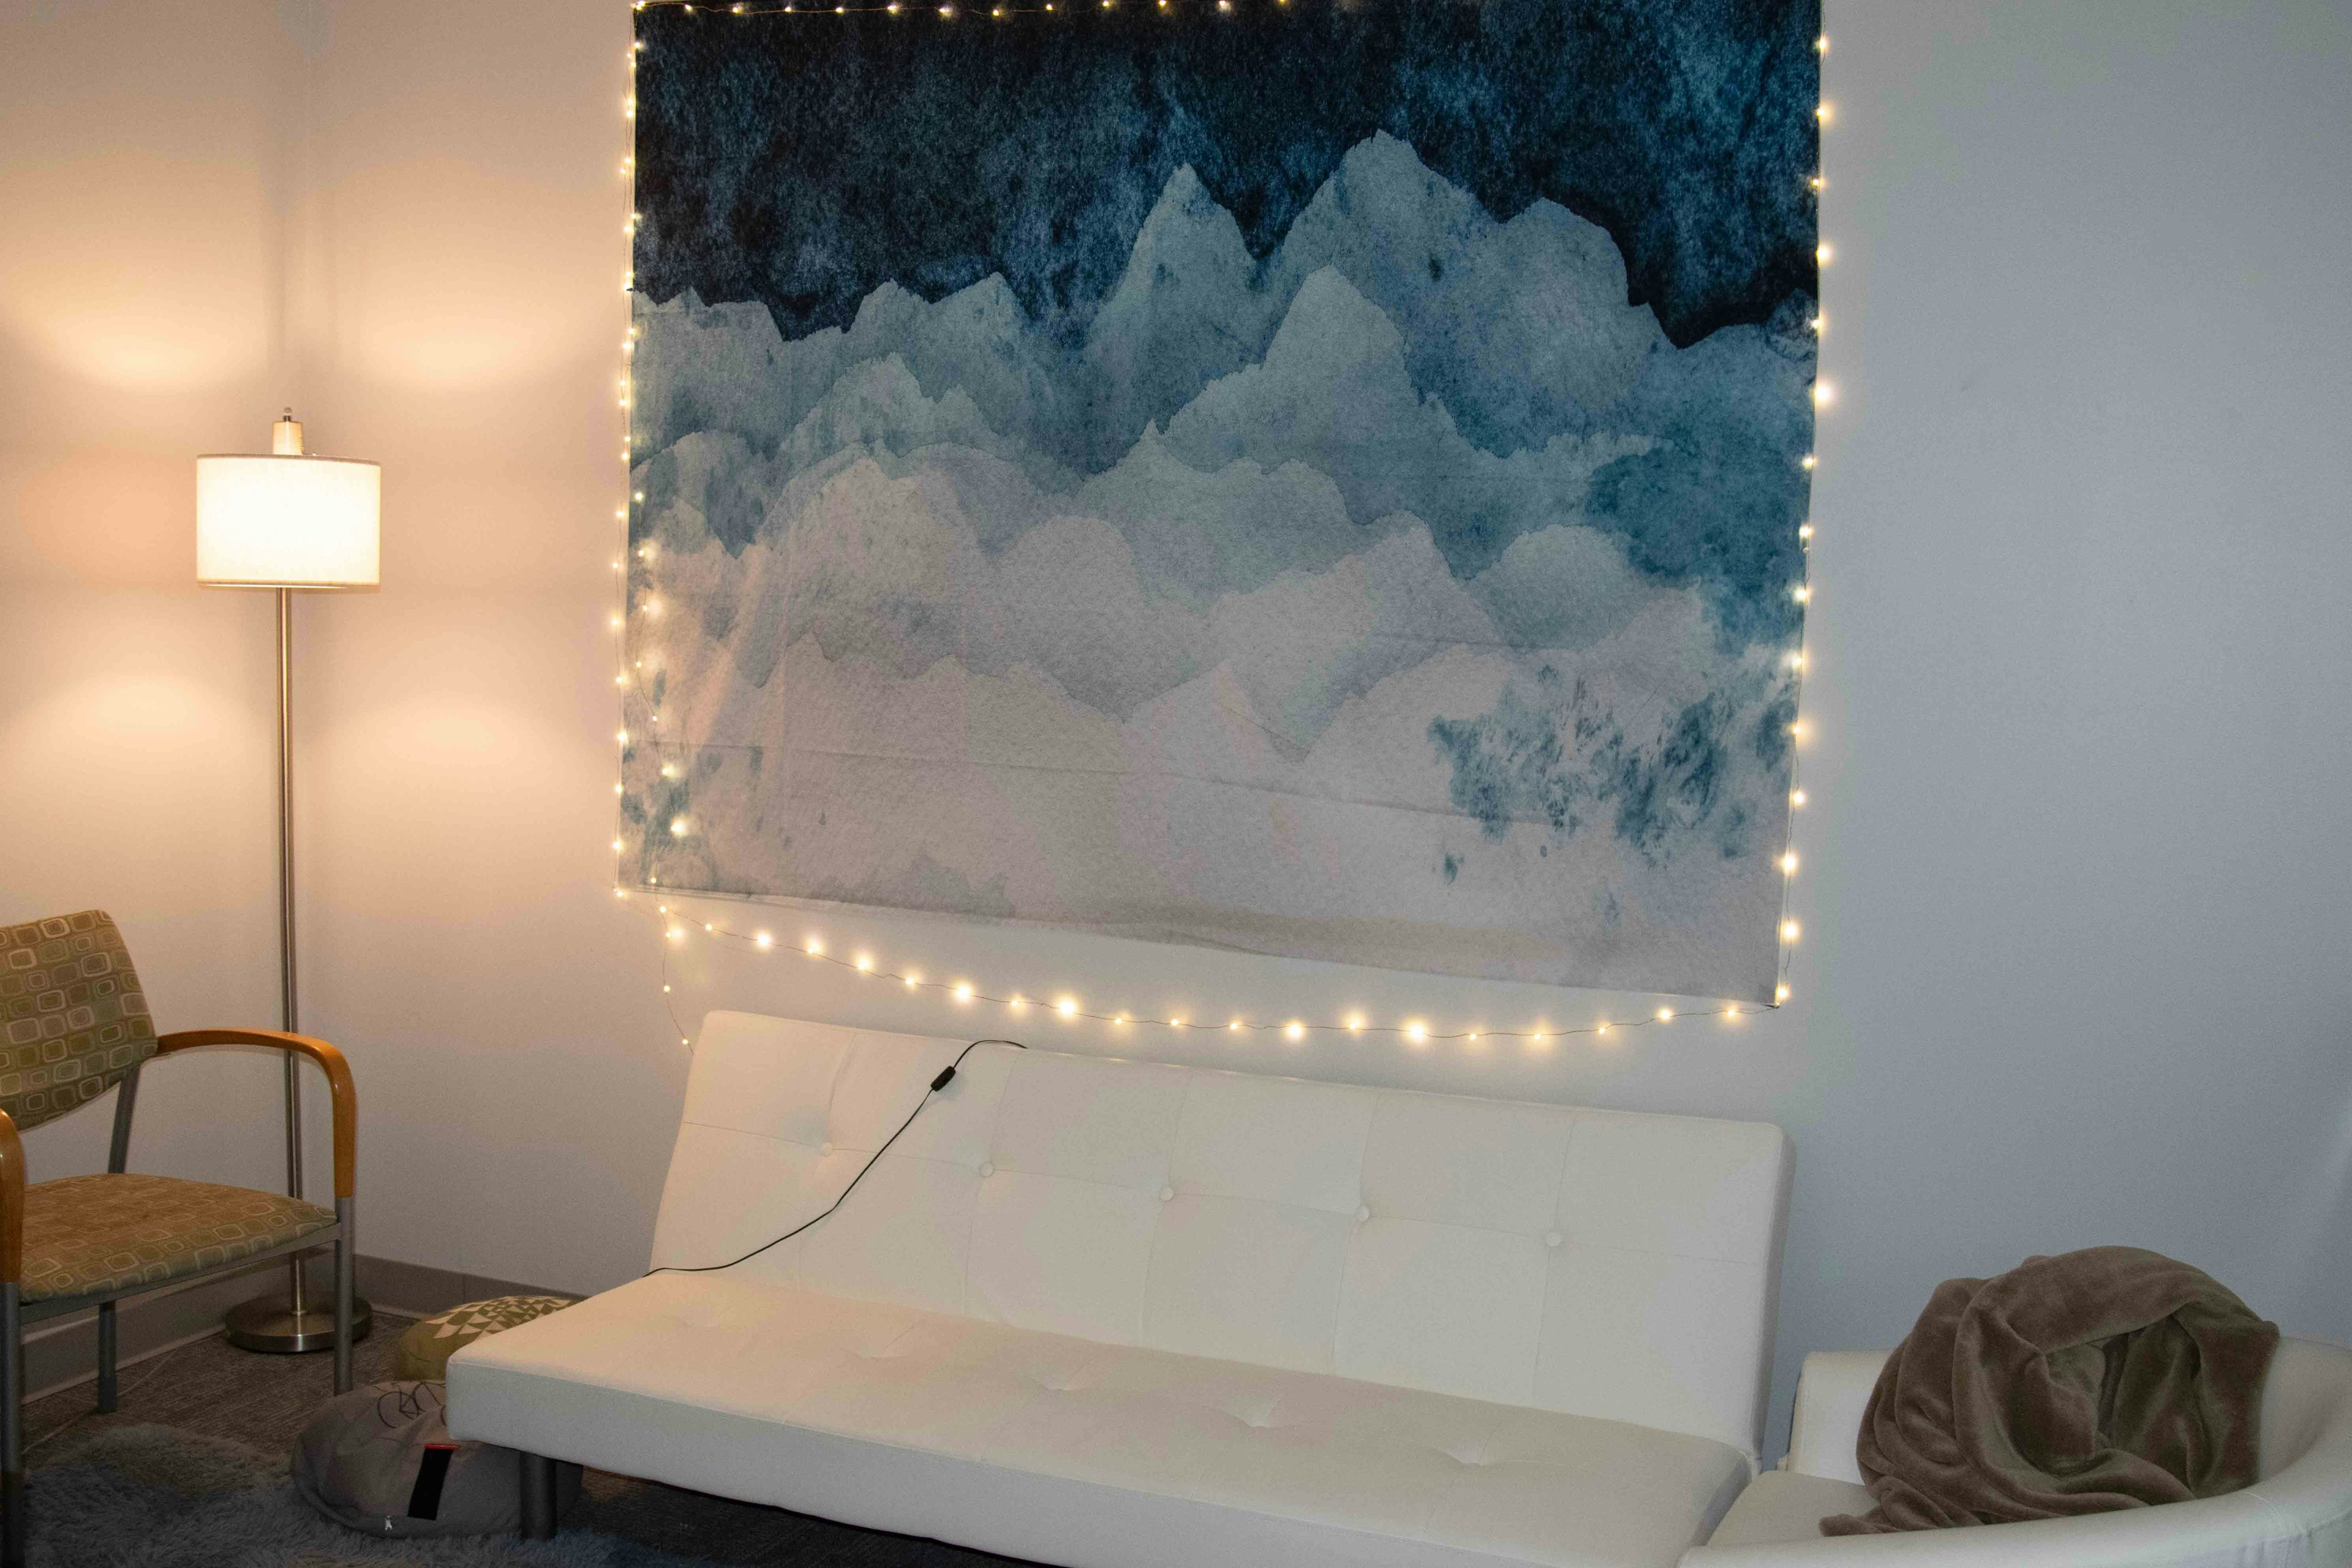 Inside of meditation room at Boulder Strong Resource Center. Blue mountain tapestry on wall outlined in twinkle lights. White futon and two chairs.